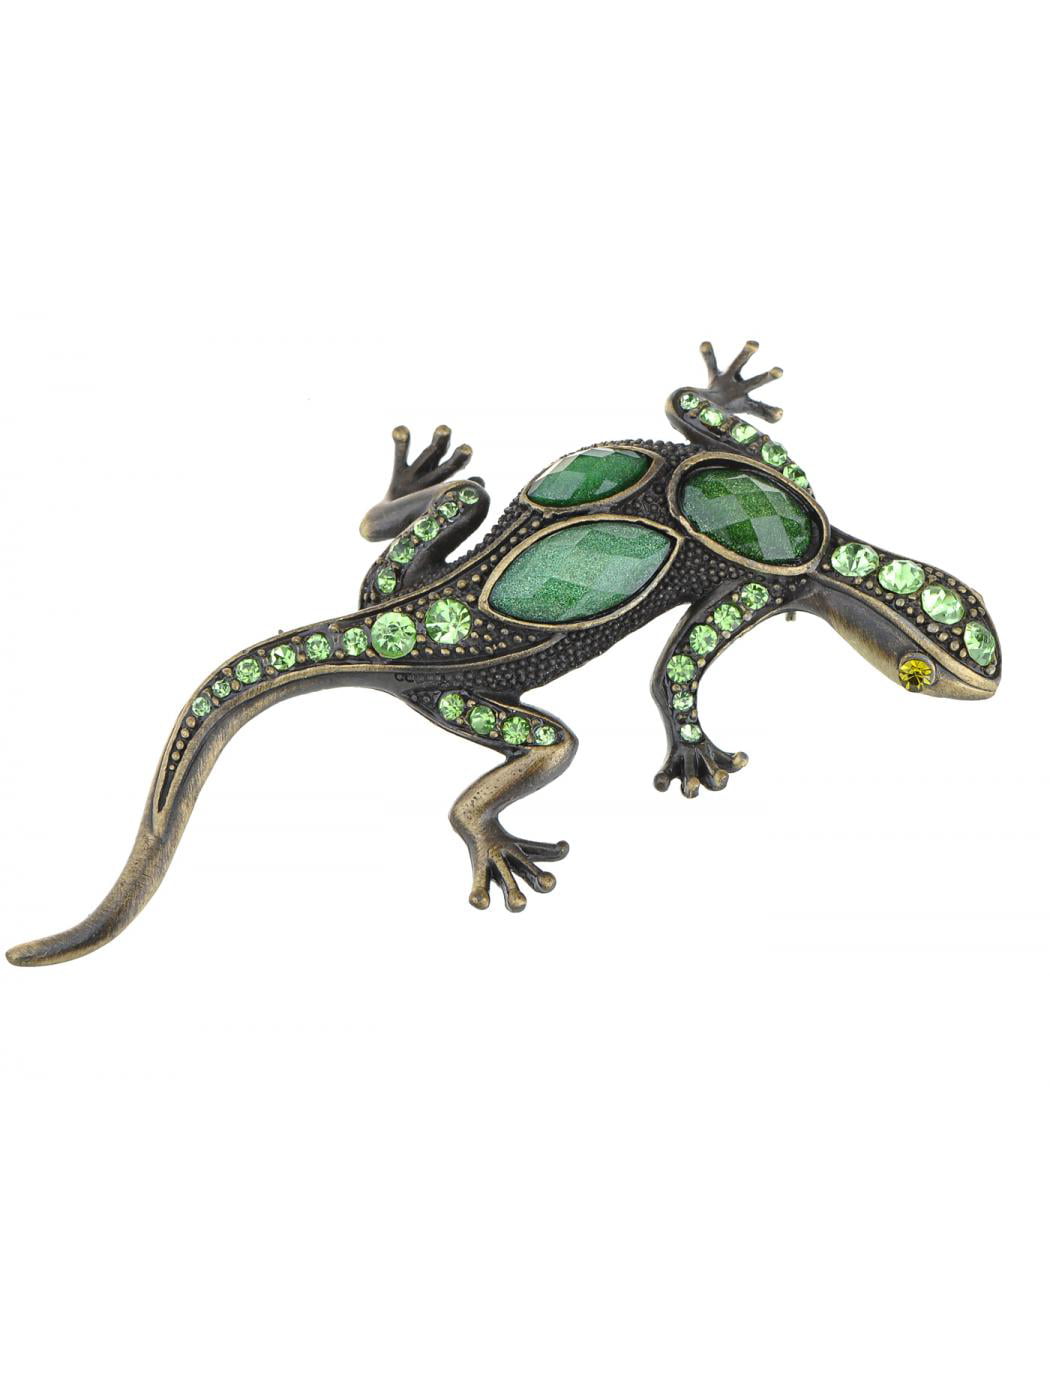 NEW OLD STOCK PEWTER "LONG LIZARD  BROOCH/PIN 